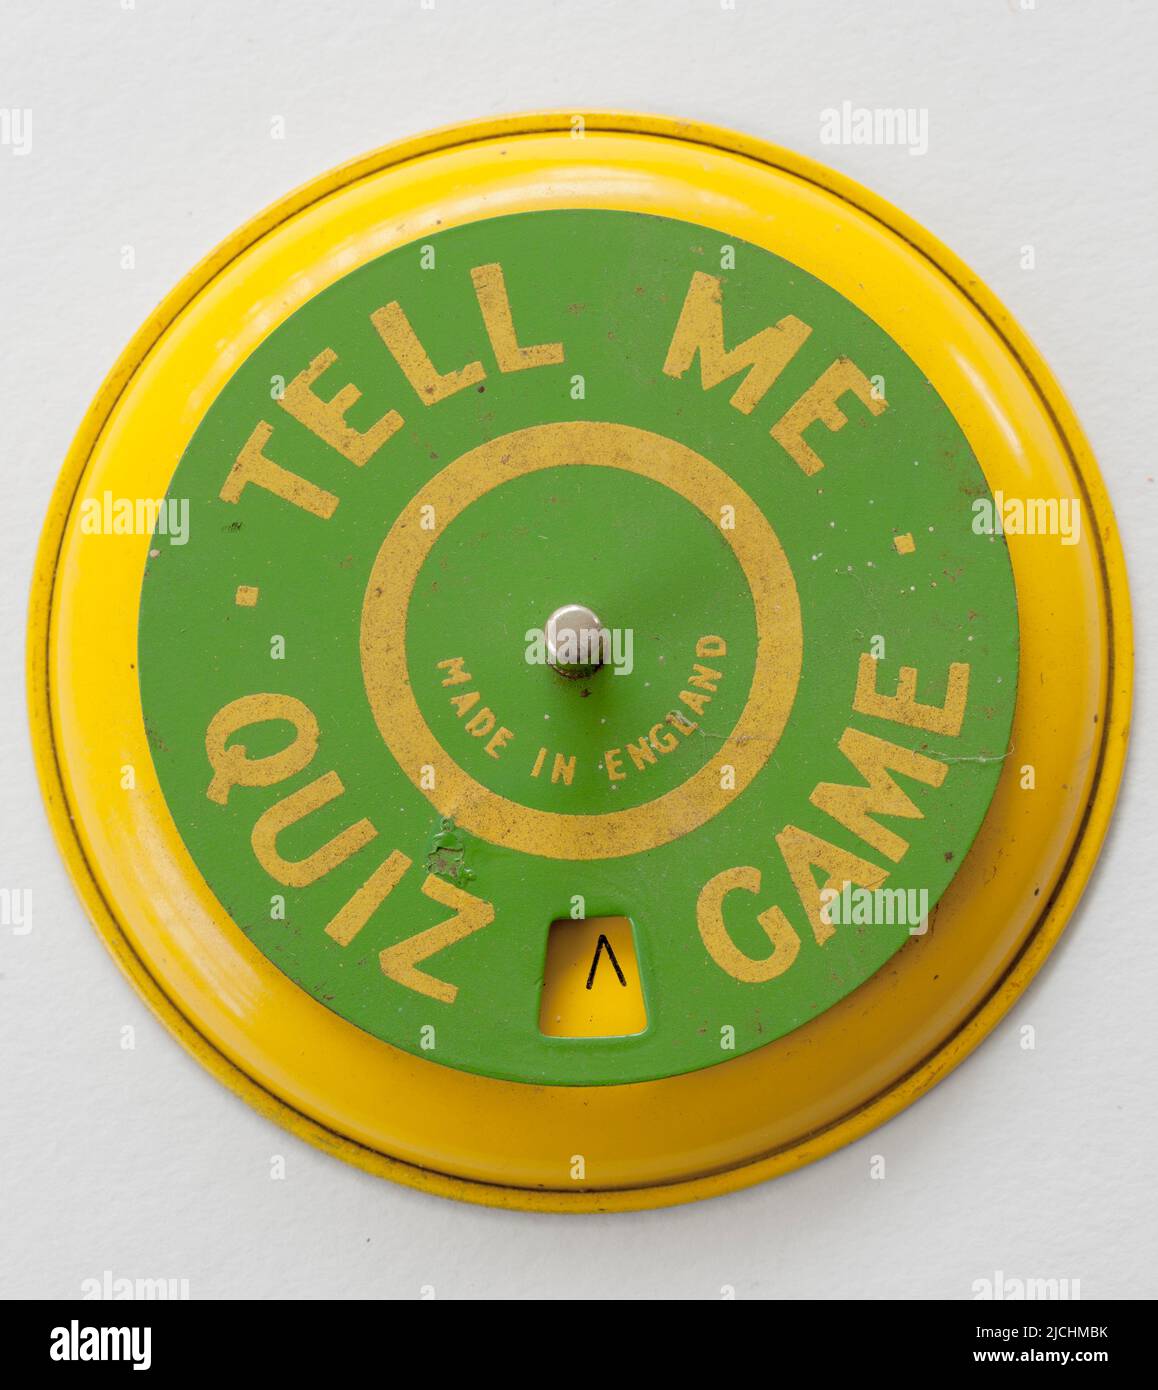 Old Tell Me Quiz Game Roulette Wheel Stock Photo